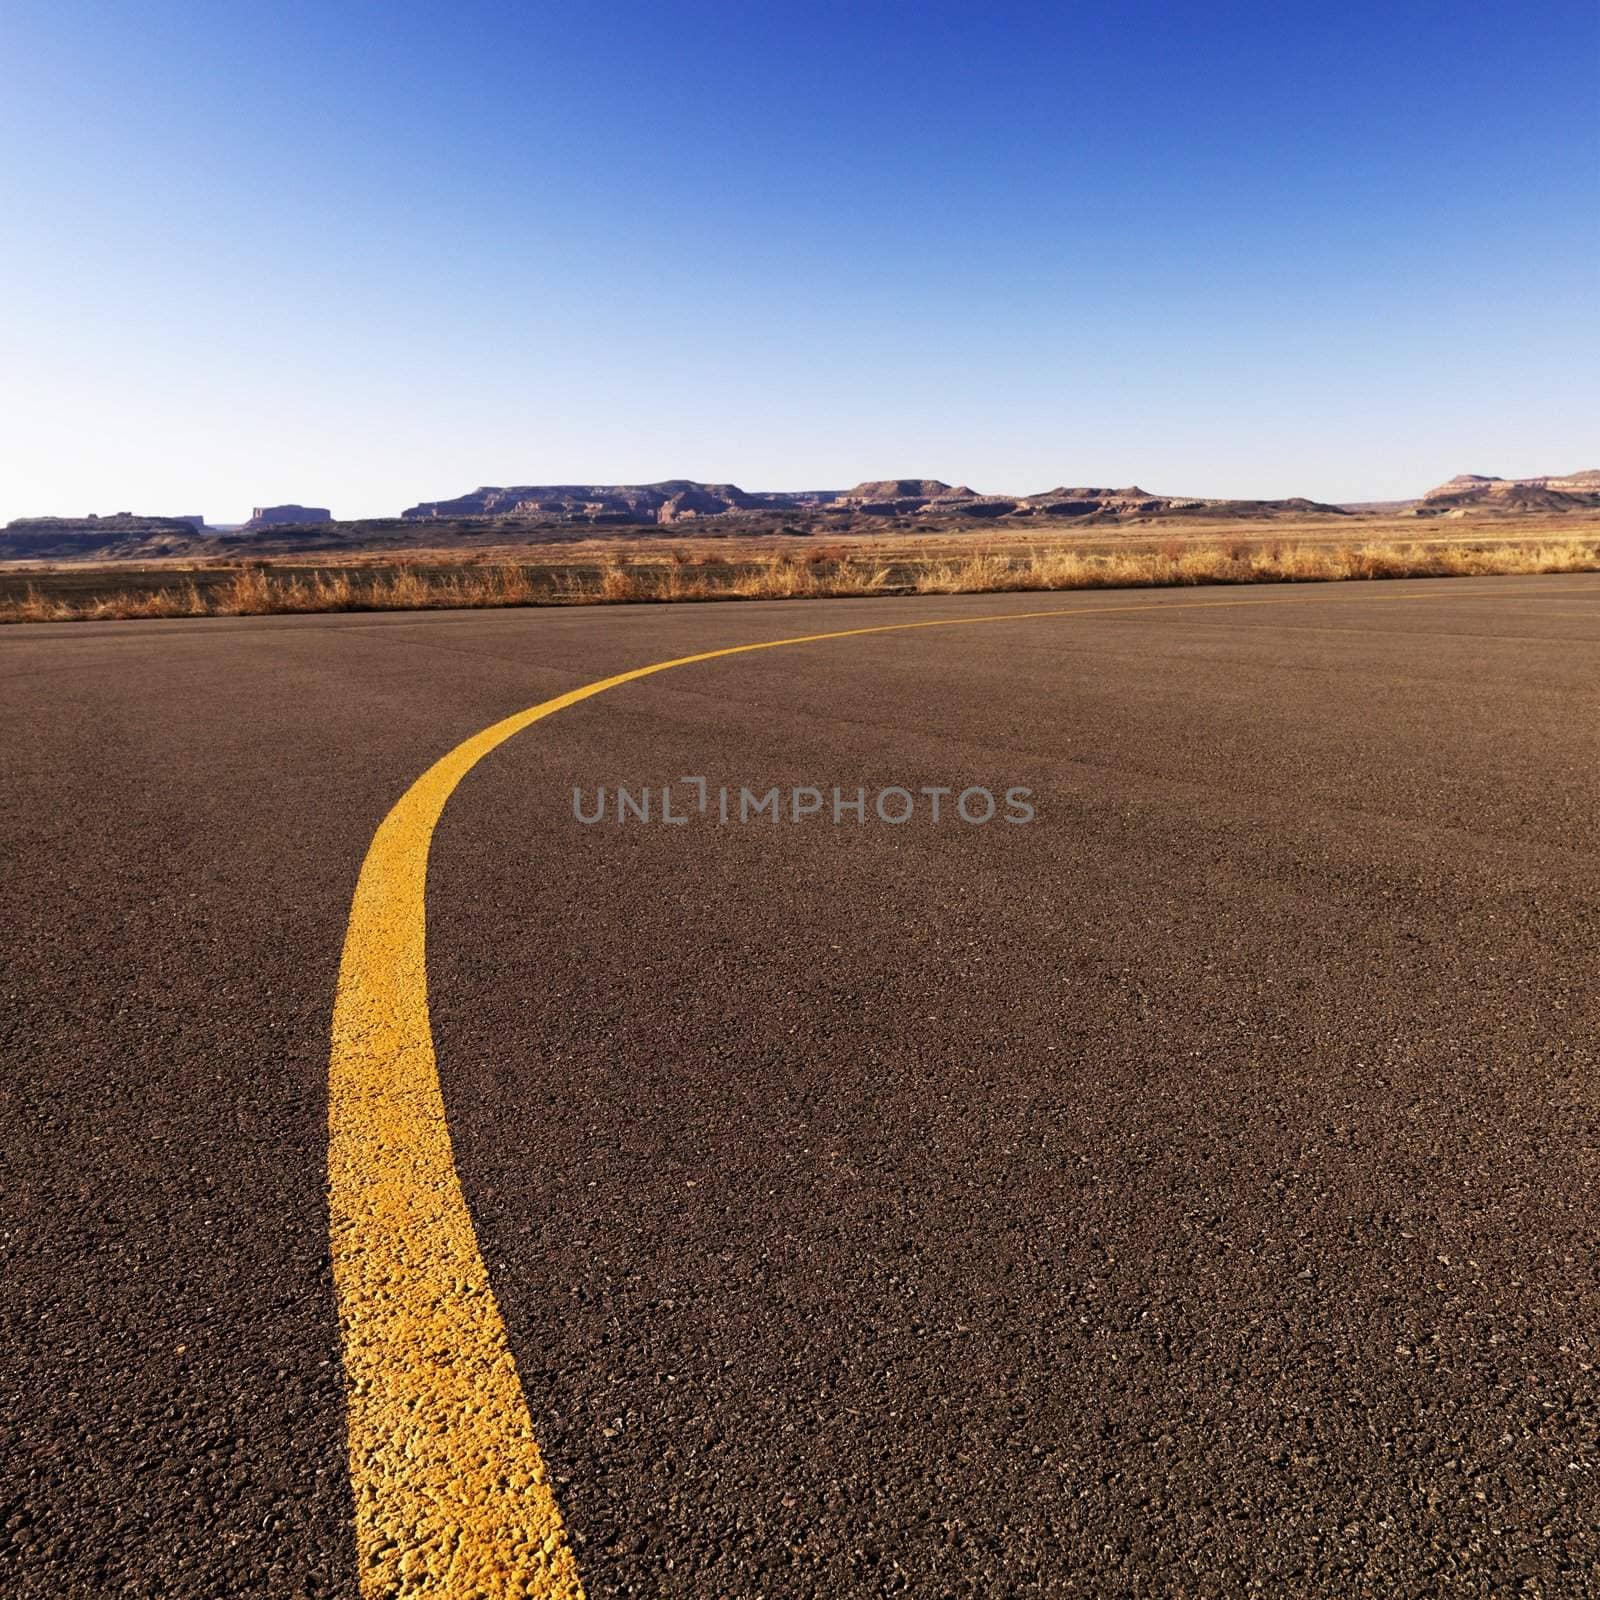 Yellow line on tarmac at Canyonlands Field Airport, Utah, United States.